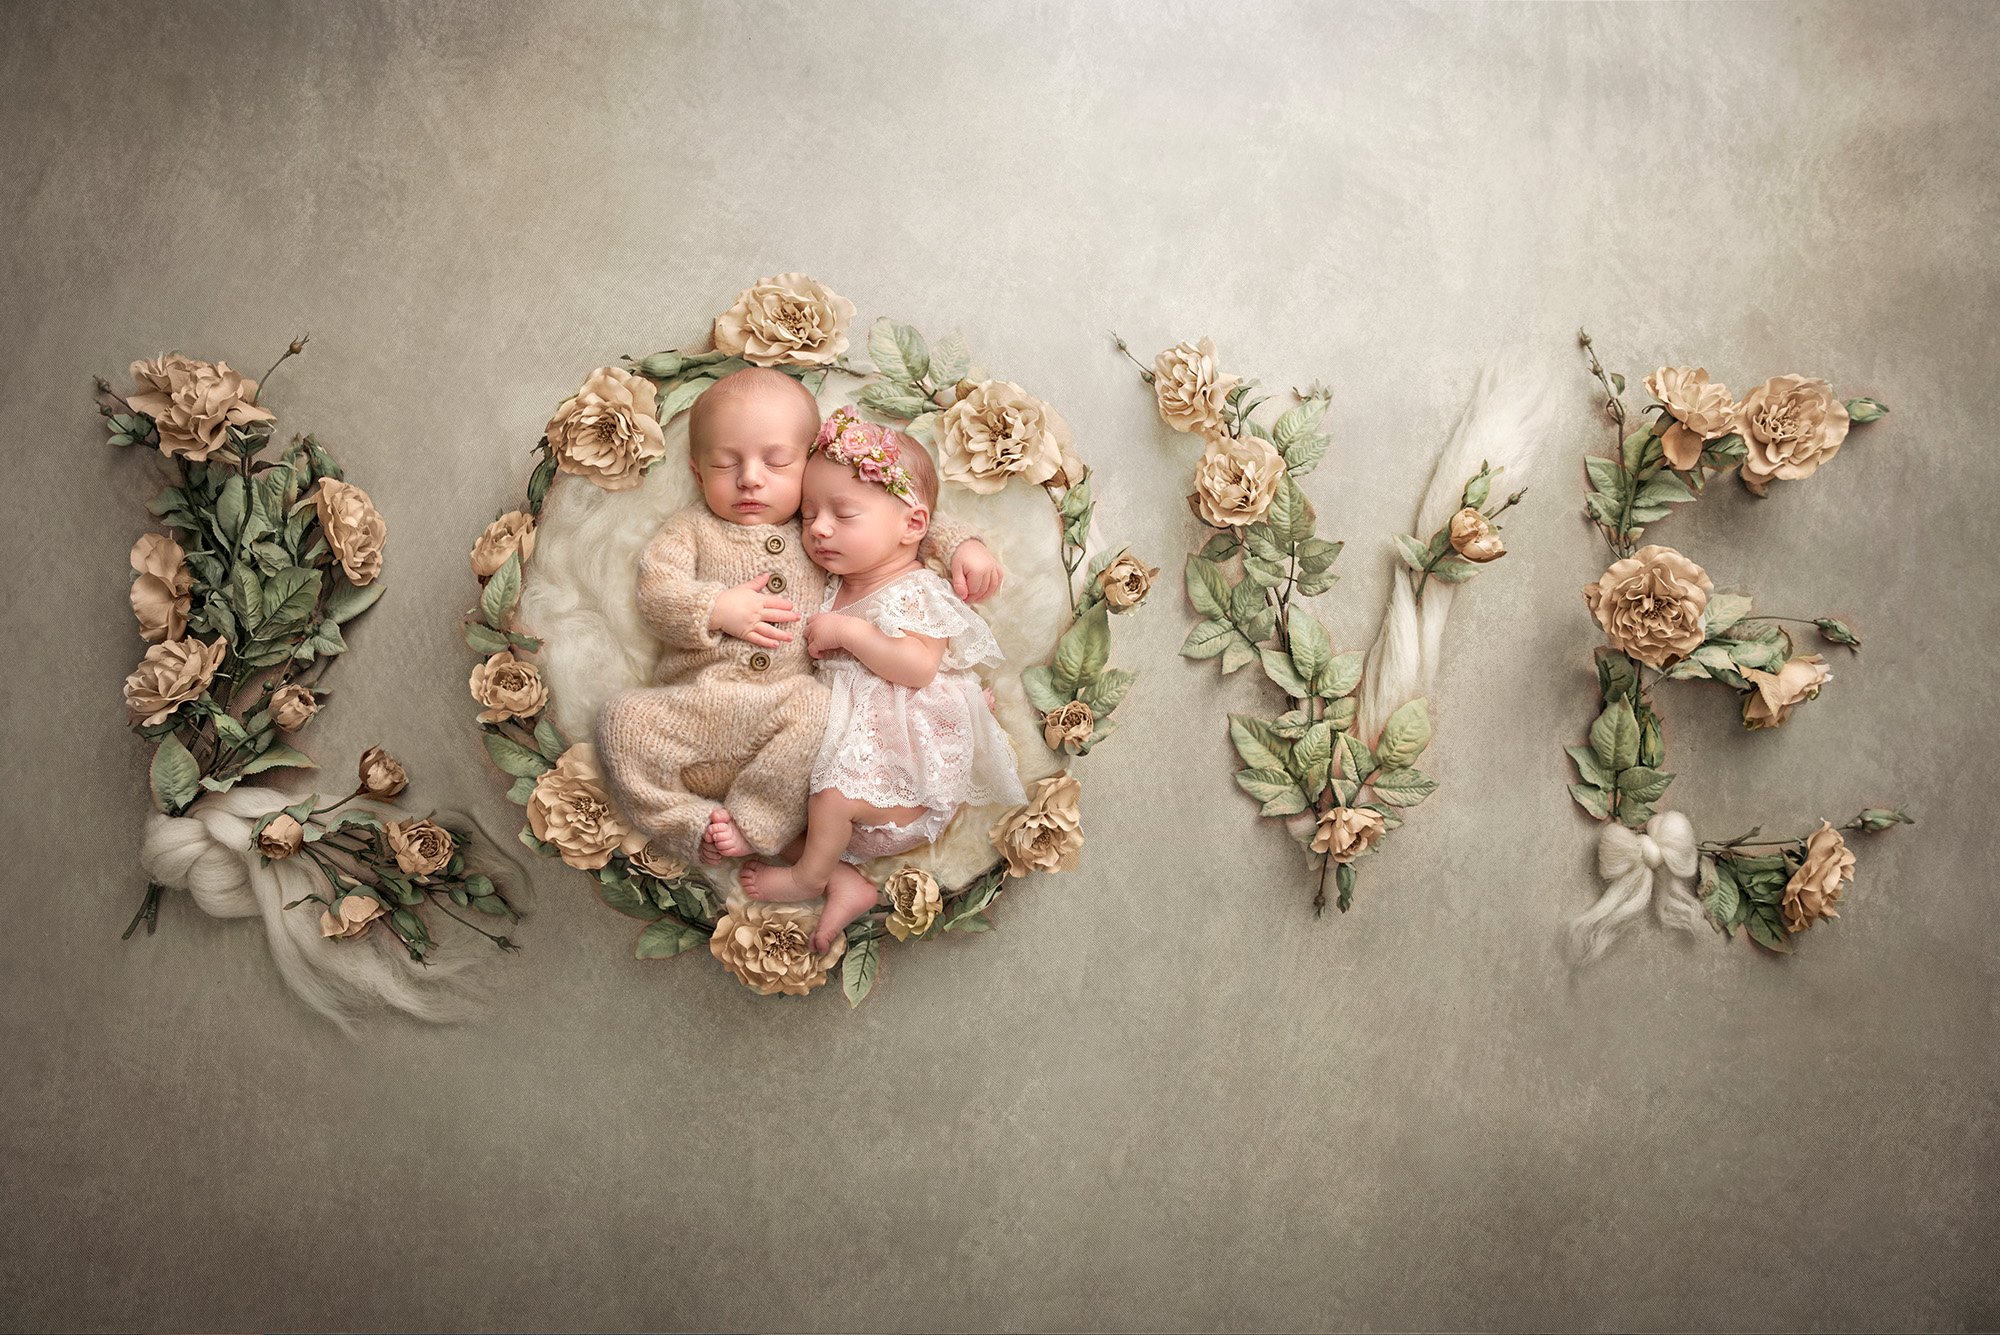 Twins newborn photography sweet newborn twins asleep on a grey background spelling out the word LOVE in flowers and bows